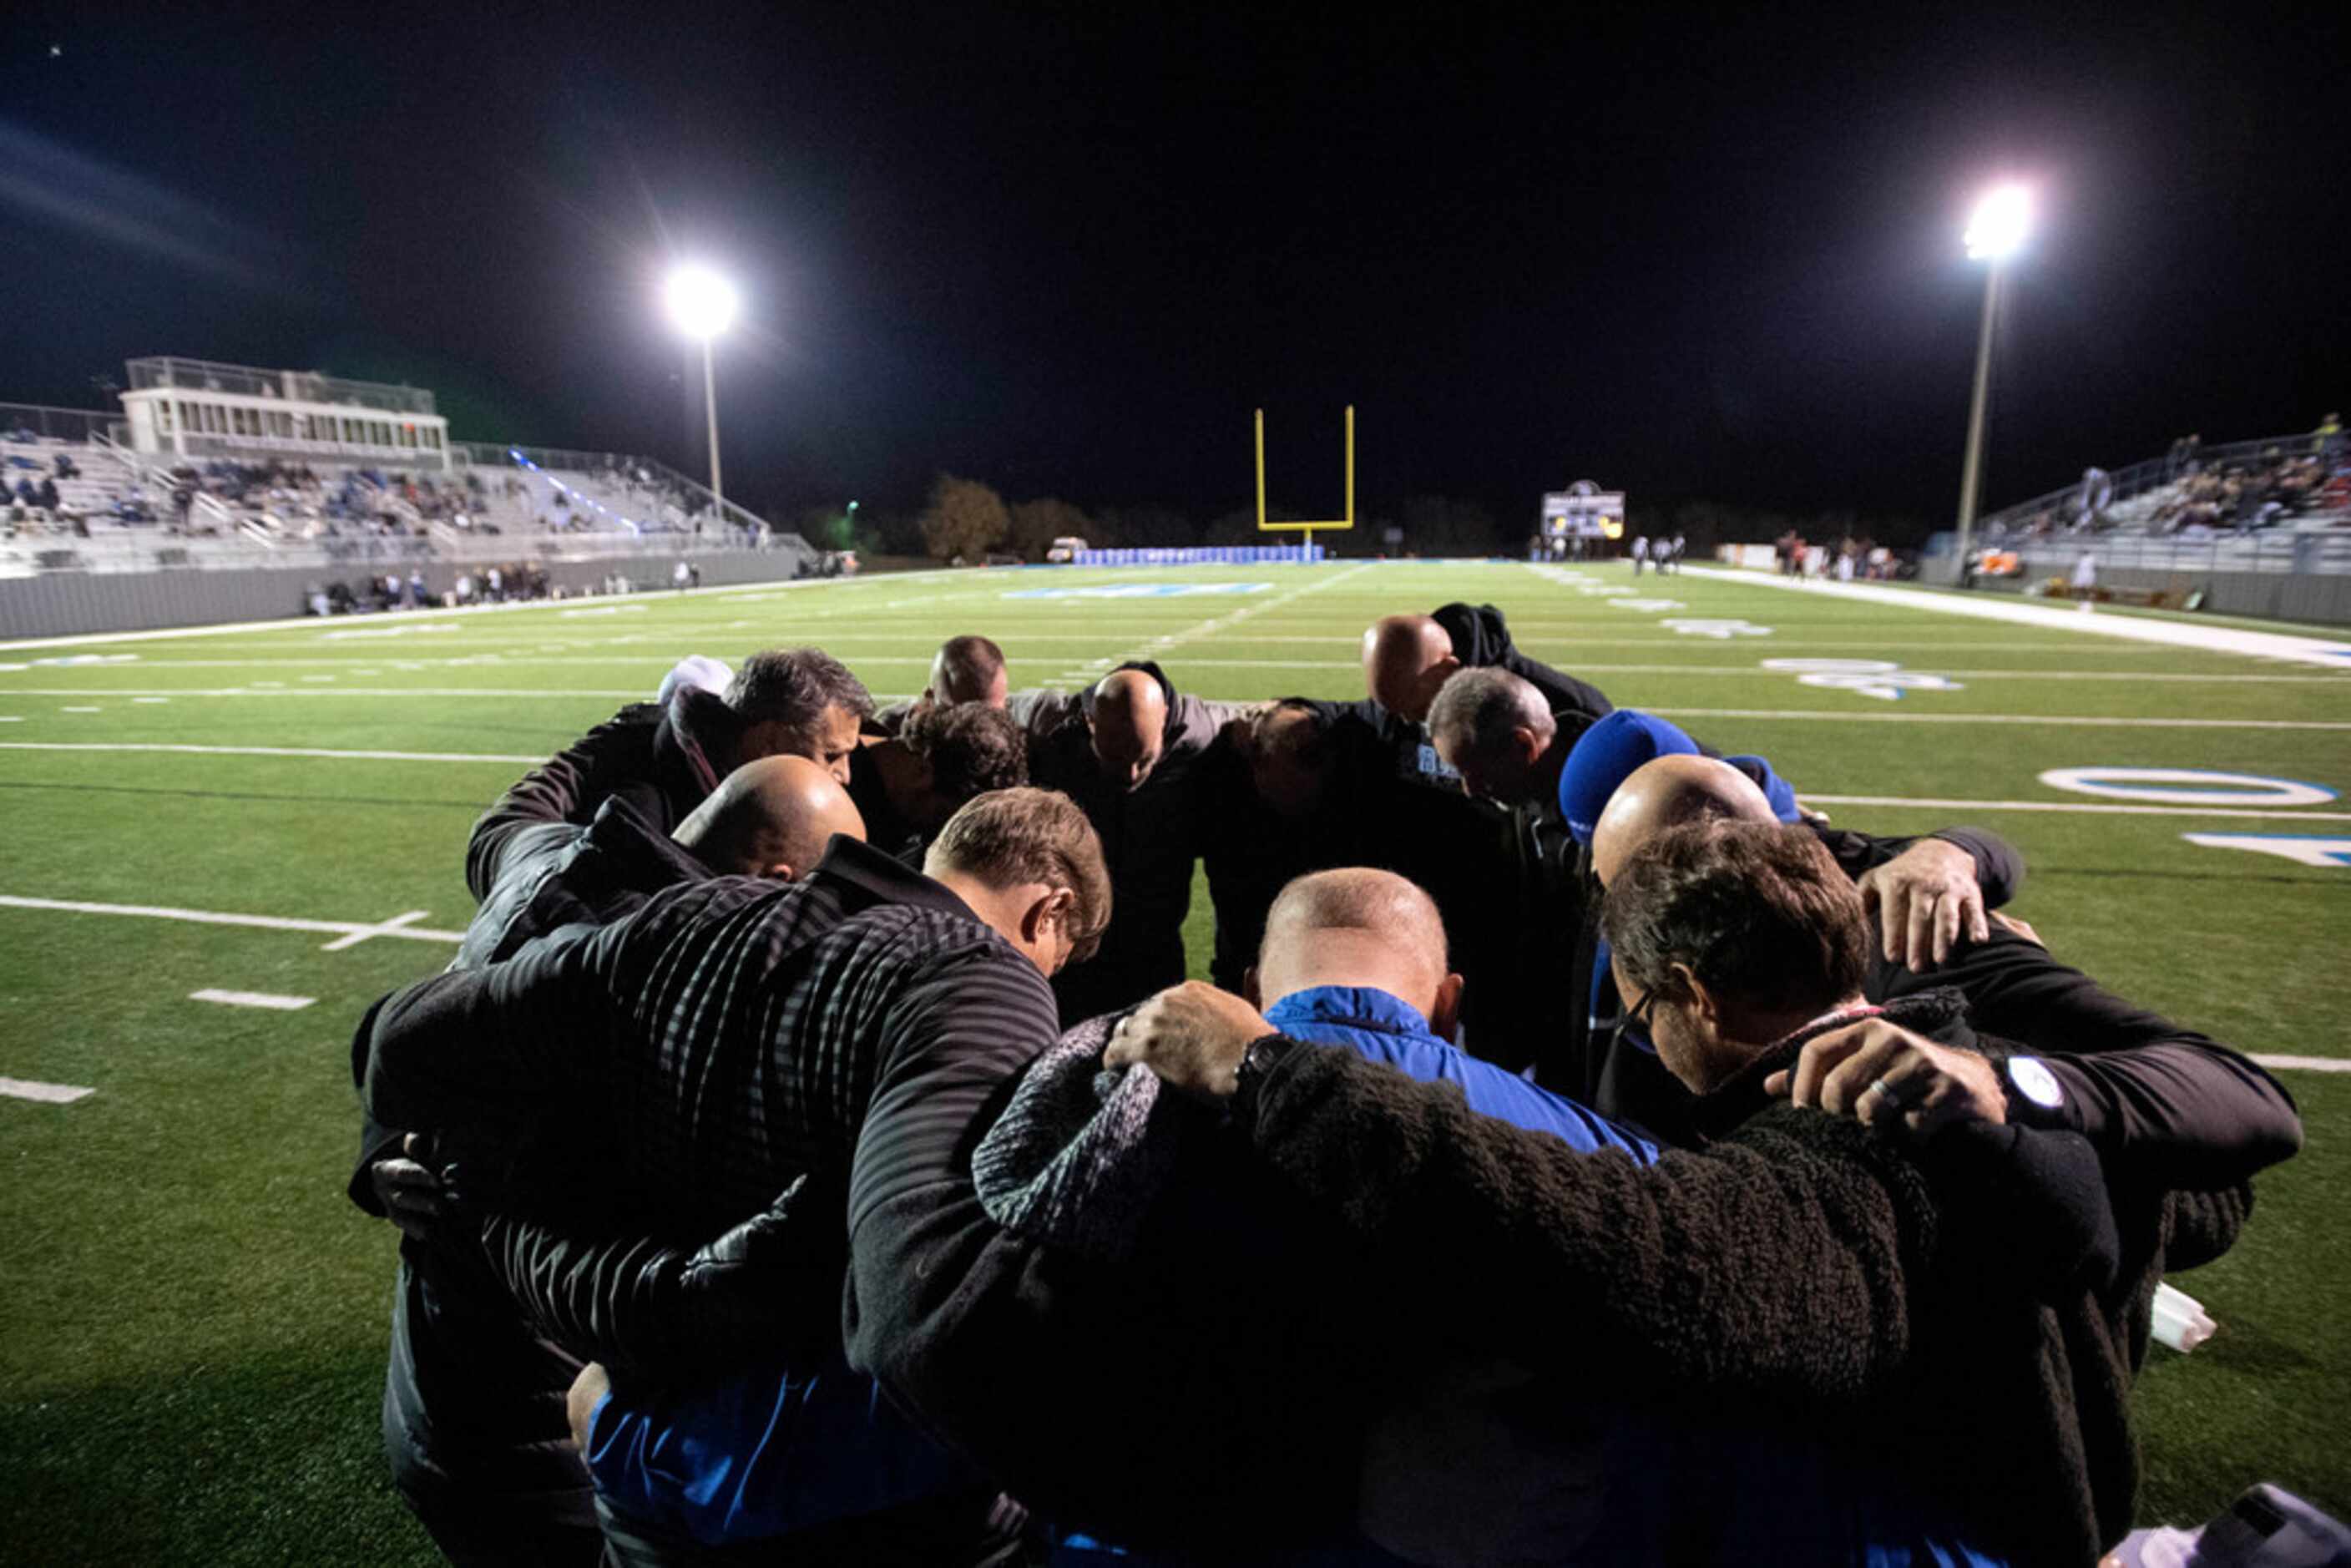 Dallas Christian dads pray before a high school football playoff game against Fort Worth...